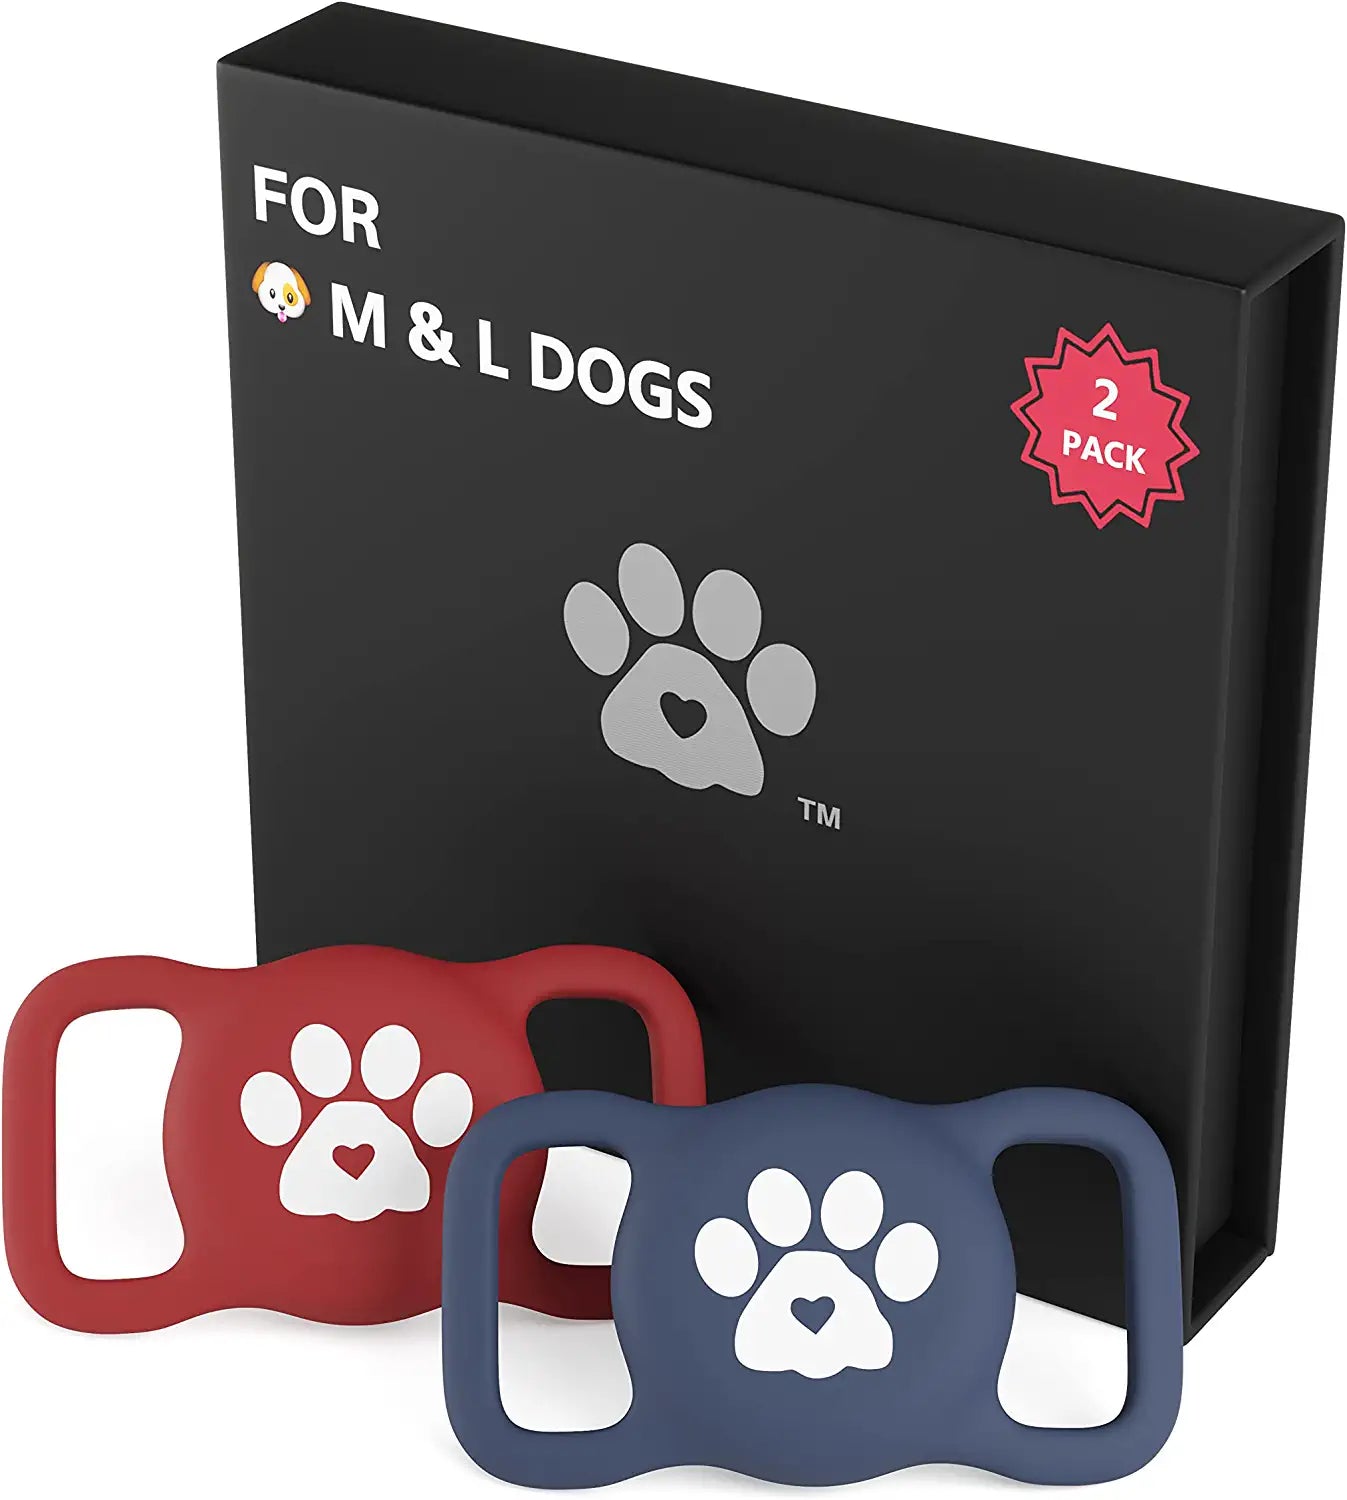 Airtag Dog Collar Holder – Available in Several Colors & Sizes - 2 Pack Silicone Dog Airtag Holder - Premium Dog Collar Airtag Holder - Apple Airtag Dog Collar Comfortably Fits Dogs & Cats Too! Electronics > GPS Accessories > GPS Cases LUVKO FAMILY Classic- M & L Dog, Dark Blue & Red Wine  